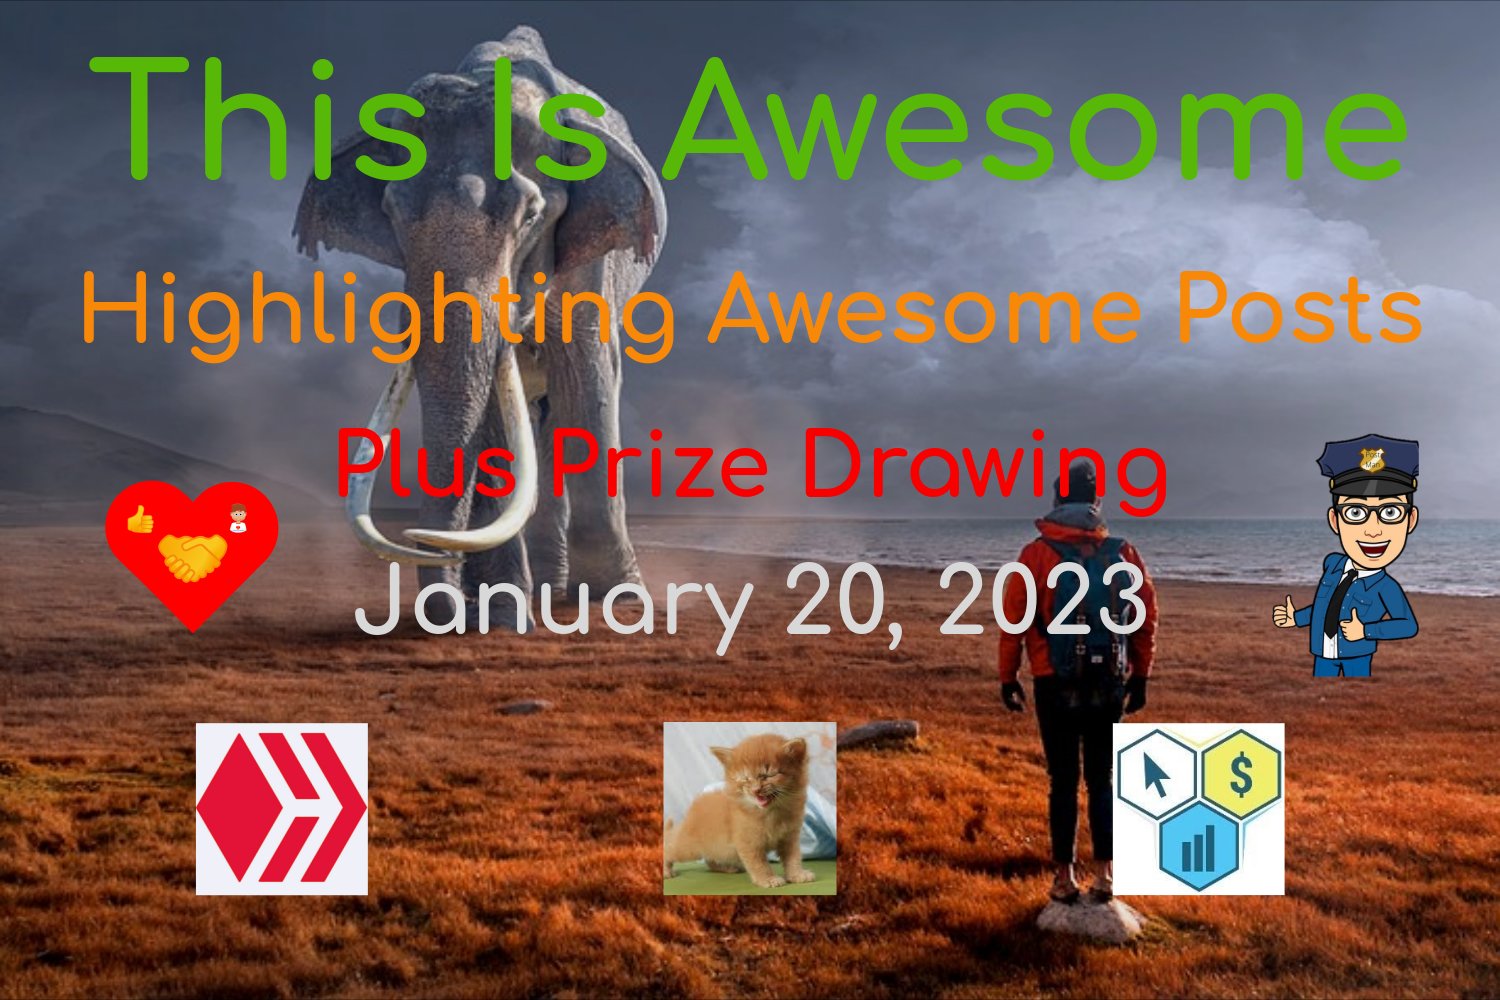 @thisisawesome/this-is-awesome-highlighting-awesome-posts-plus-prize-drawing-january-20-2023